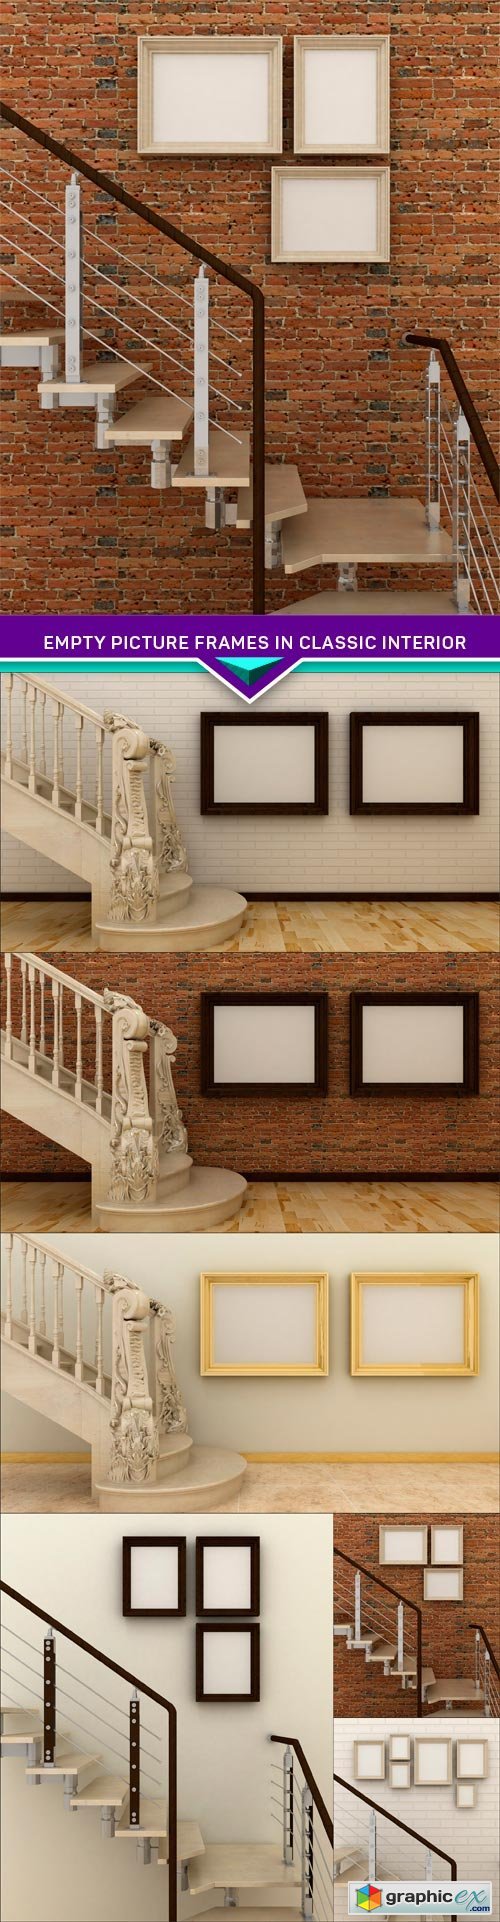 Empty picture frames in classic interior 6X JPEG